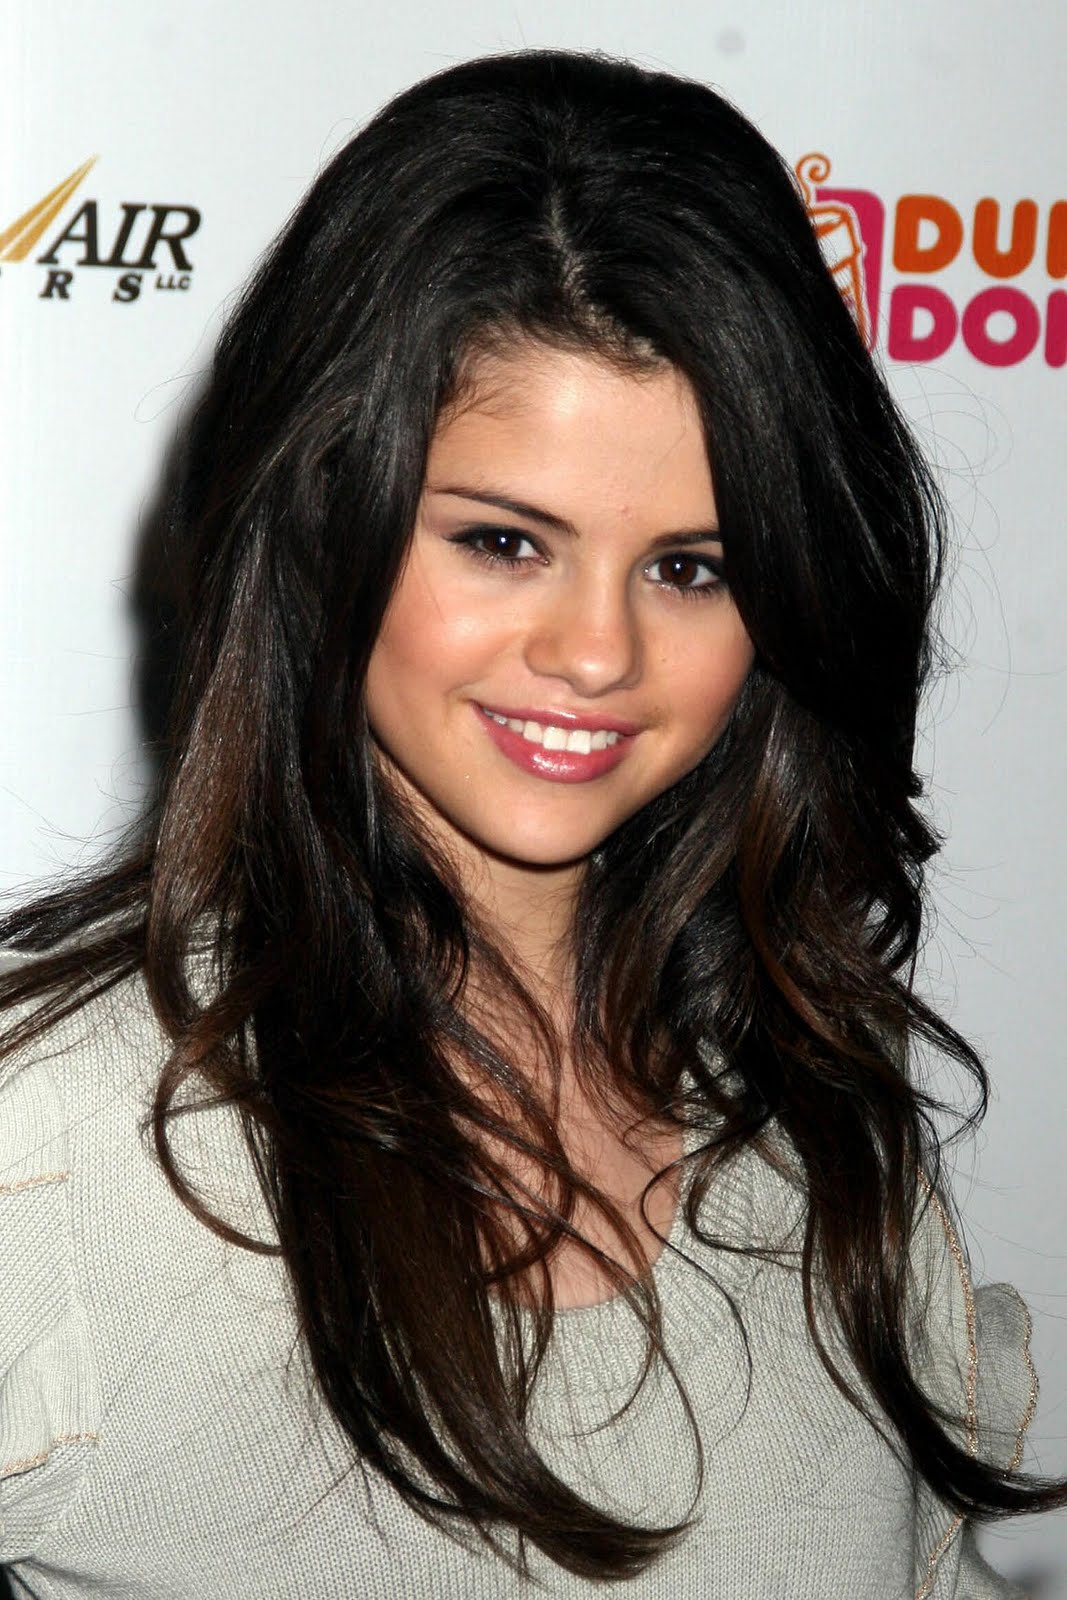 Selena Gomez Hairstyles Picture, Long Hairstyle 2011, Hairstyle 2011, New Long Hairstyle 2011, Celebrity Long Hairstyles 2054